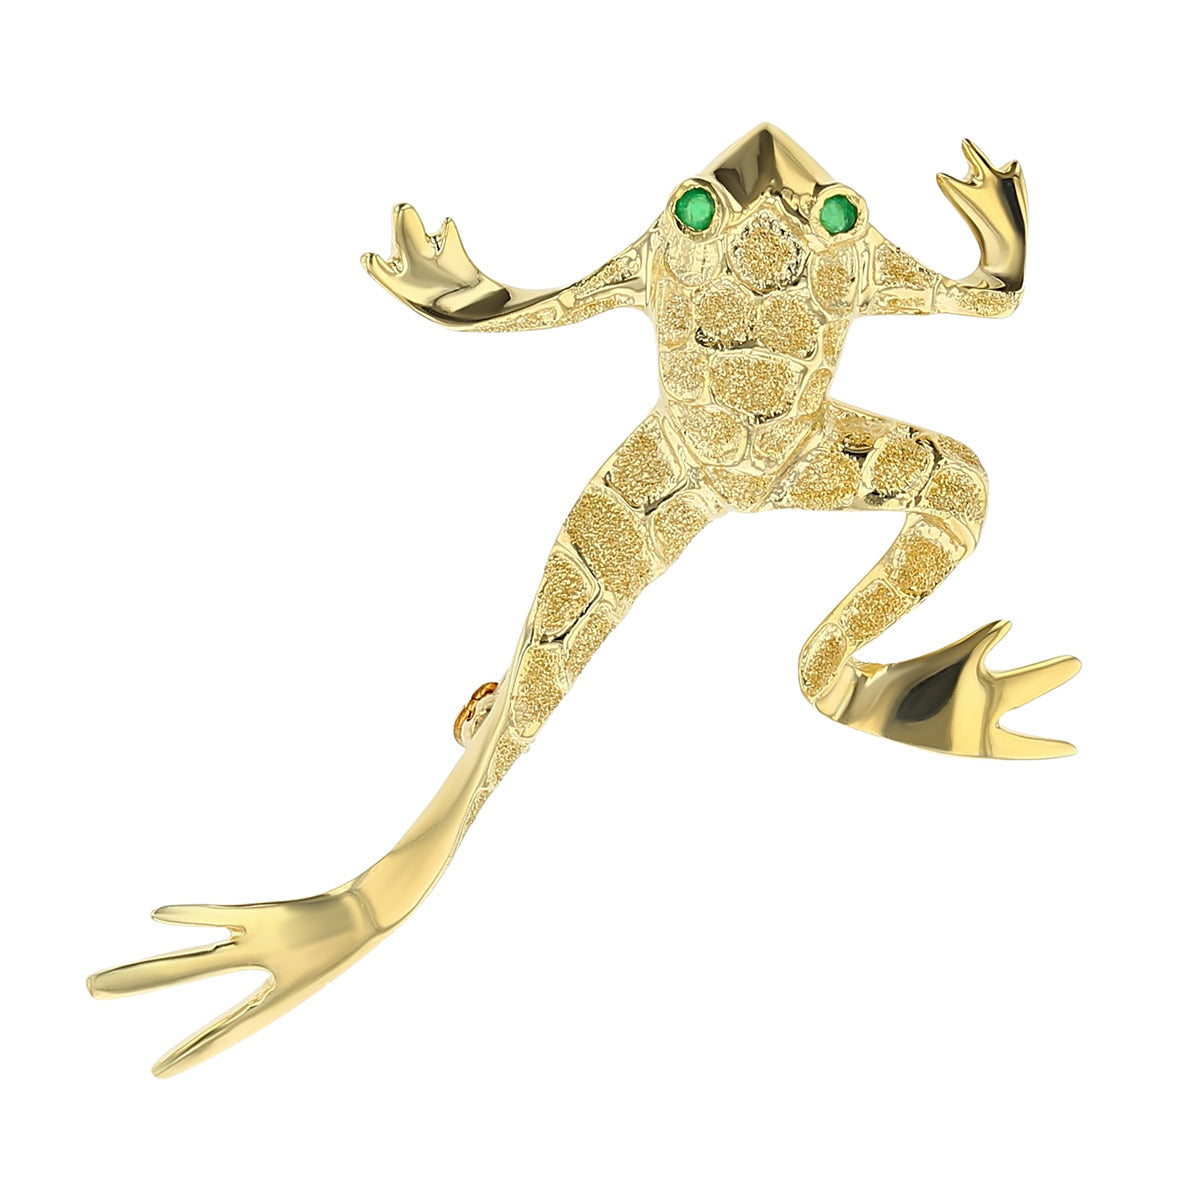 14K Yellow Gold Leap Frog Pin with Emerald Eyes